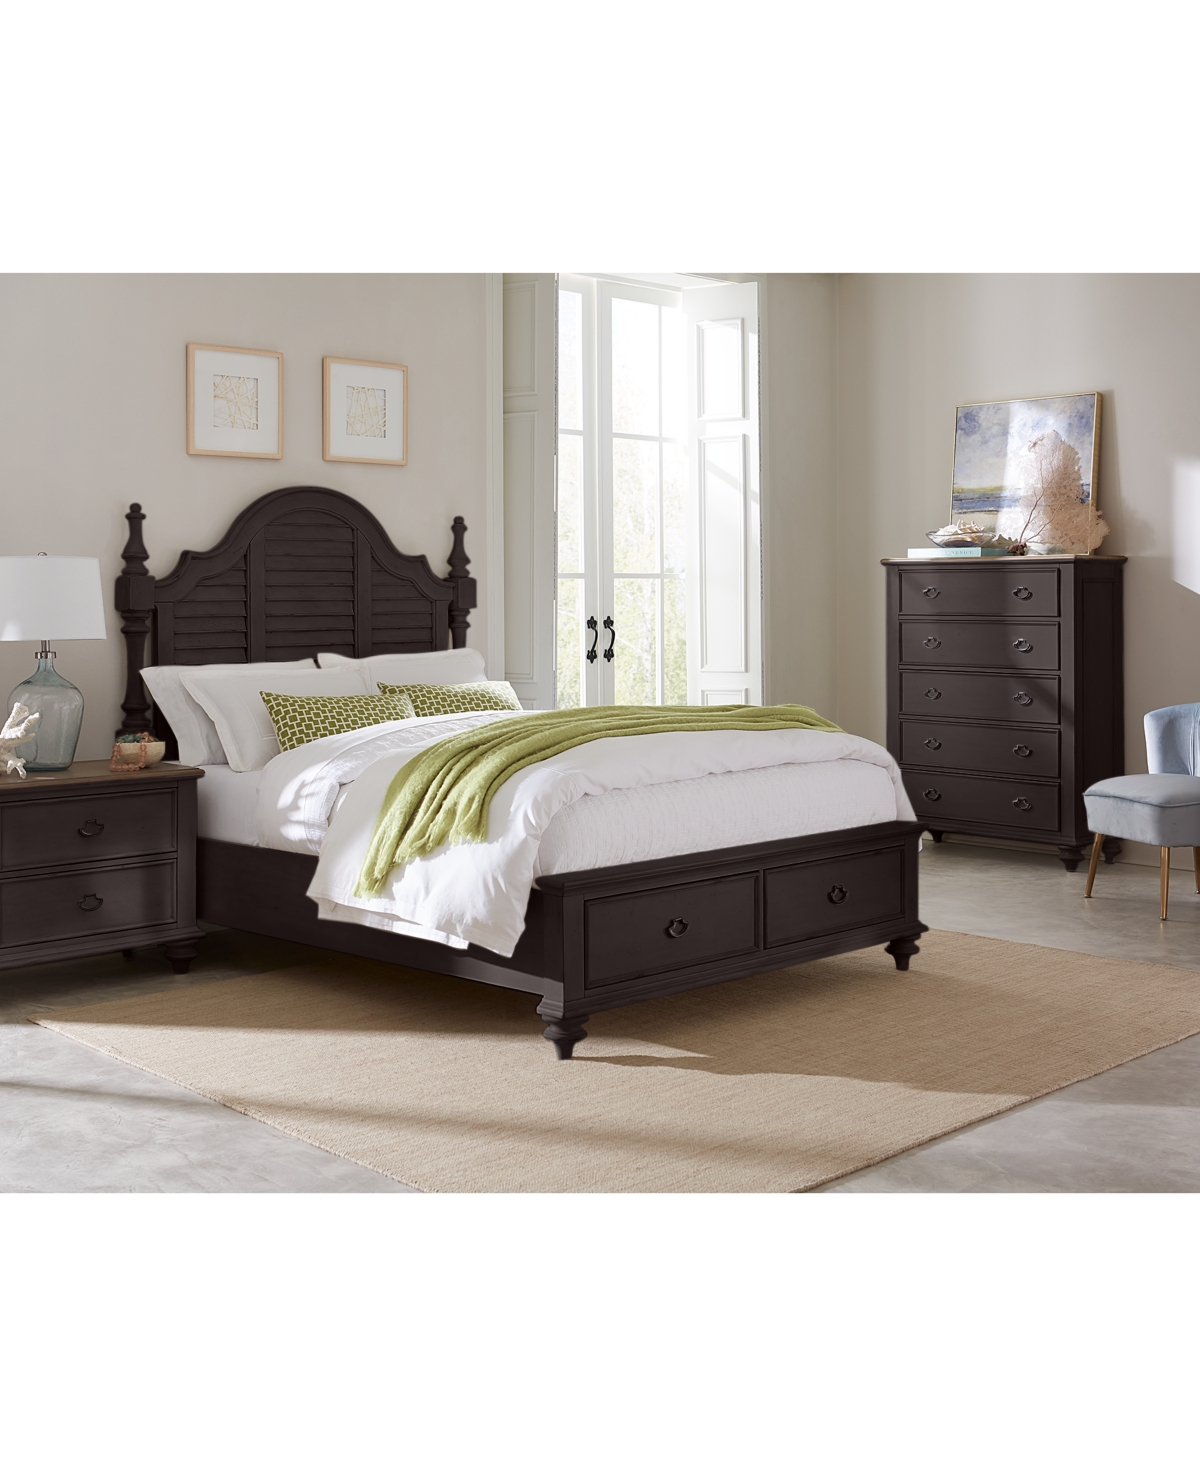 Macy's Mandeville 3pc Bedroom Set (louvered California King Storage Bed + Drawer Chest + 2-drawer Nightstan In Brown